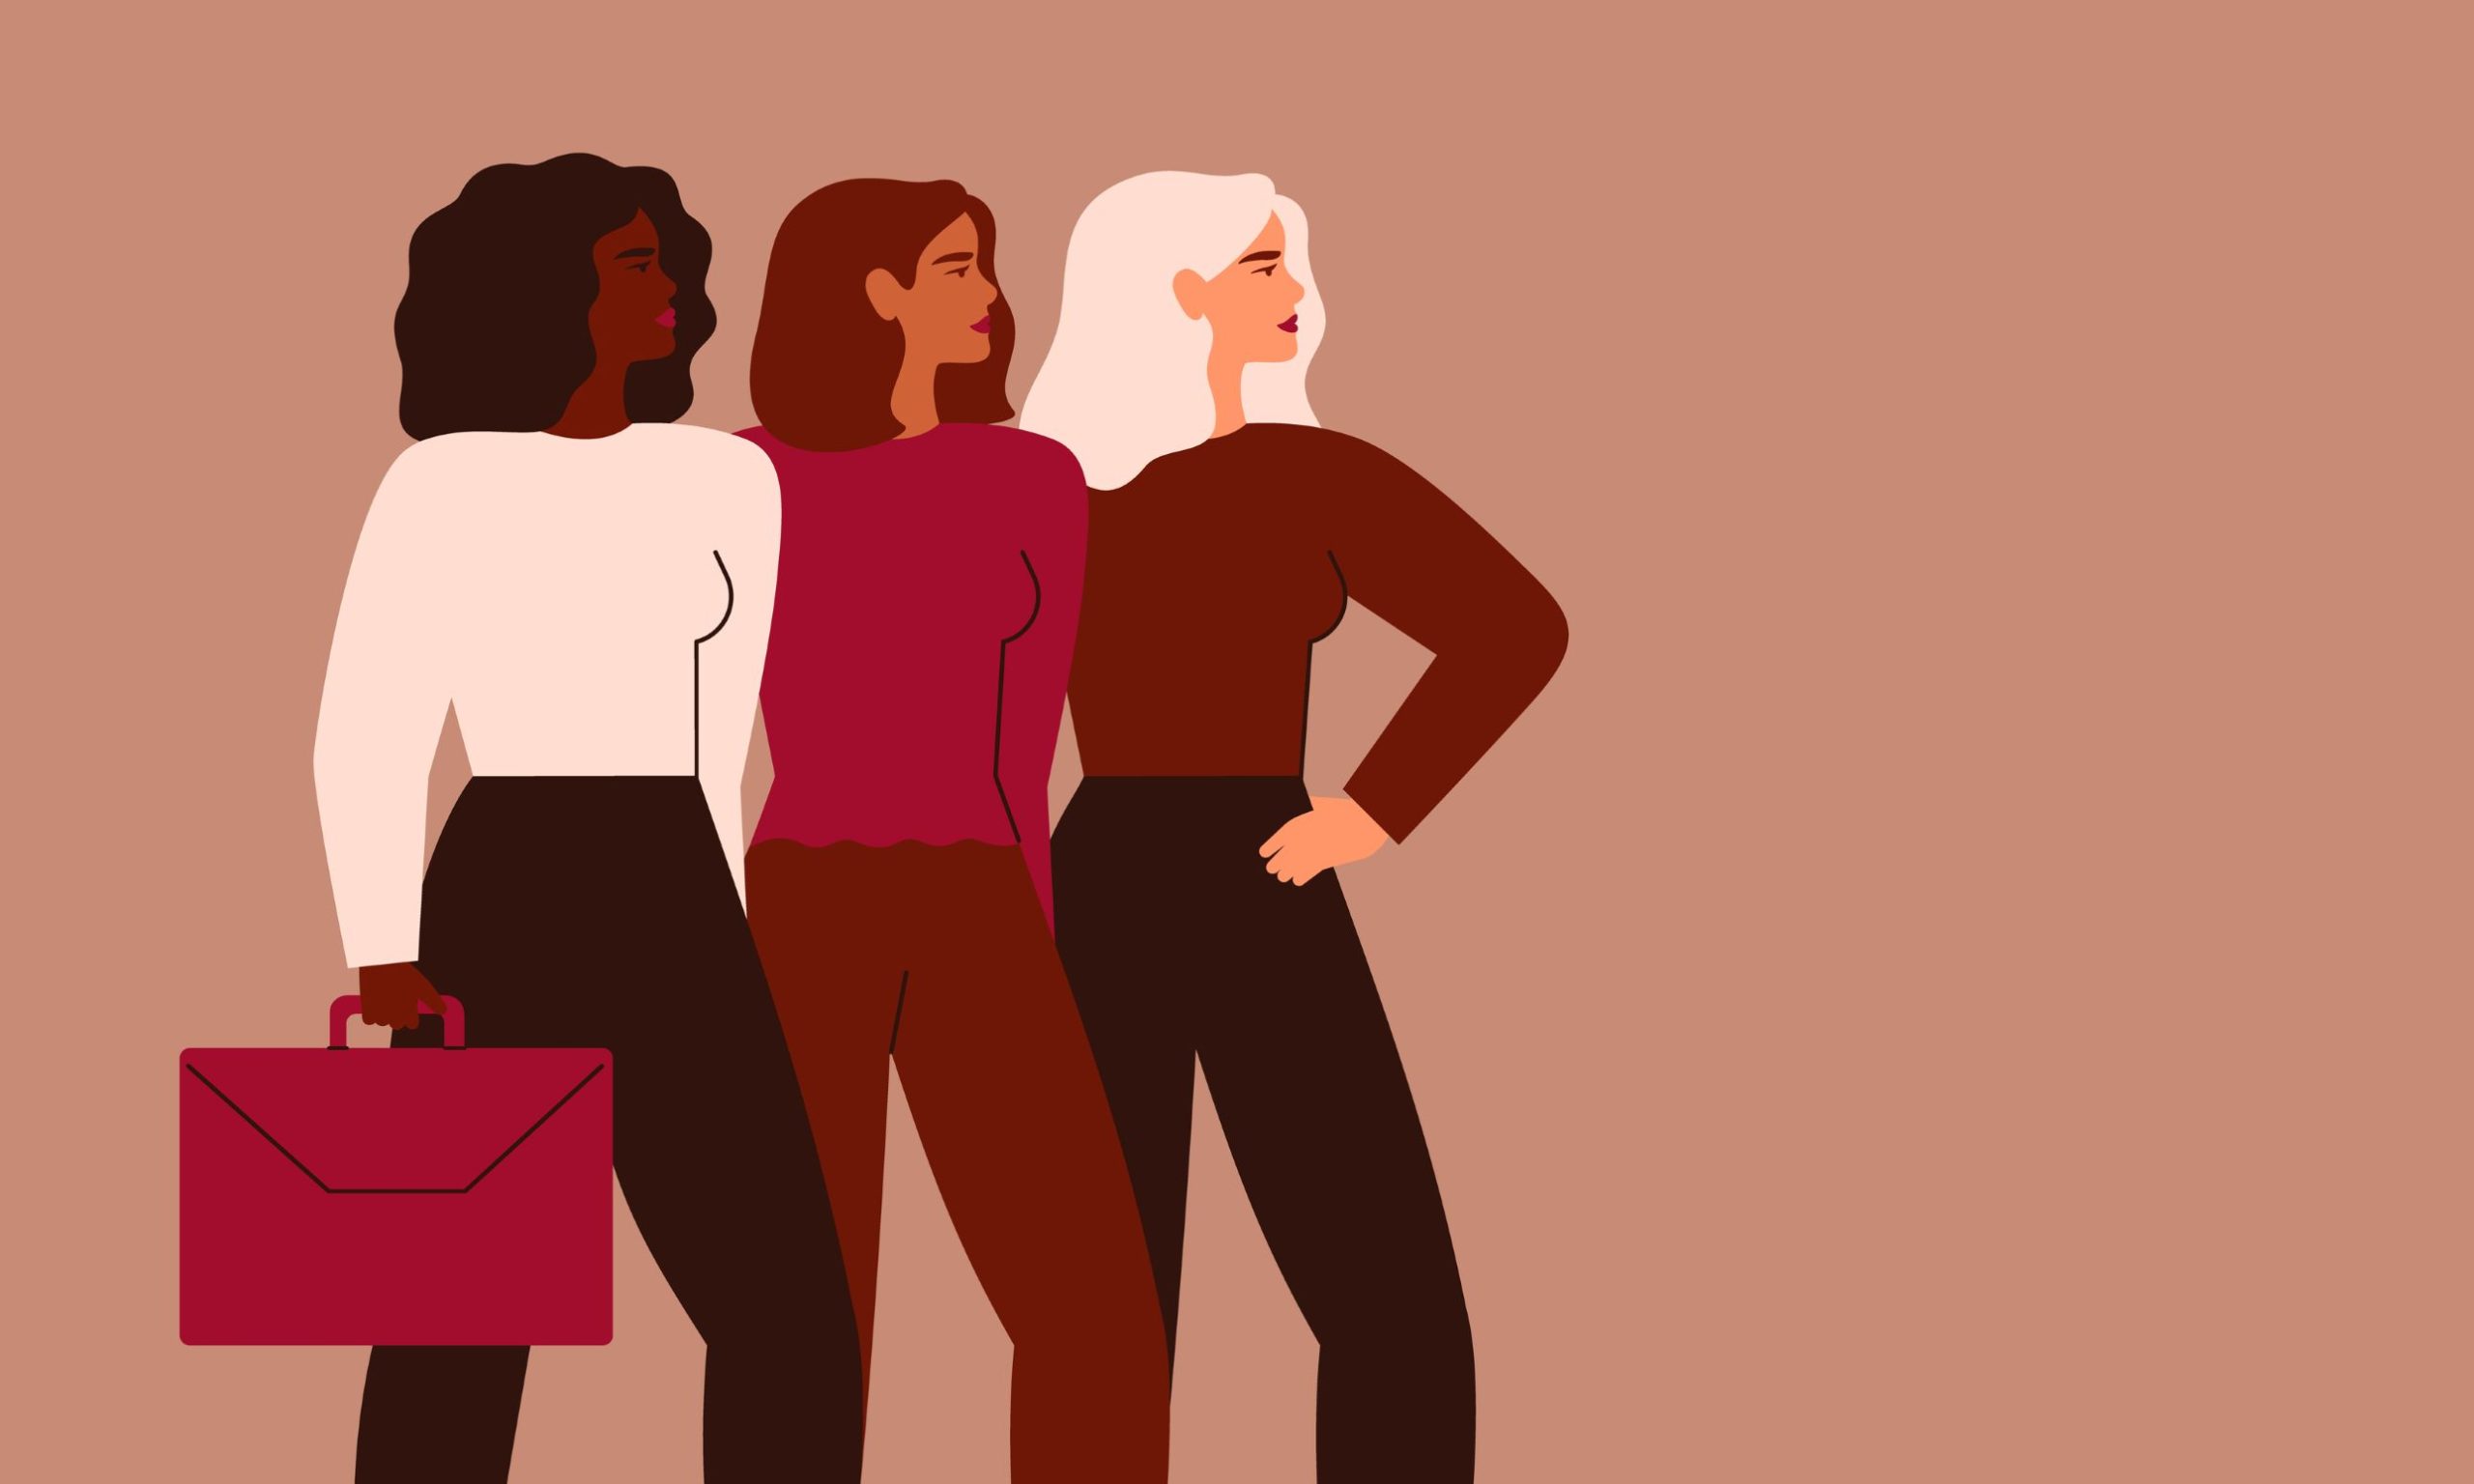 How to Support Women-Owned Businesses